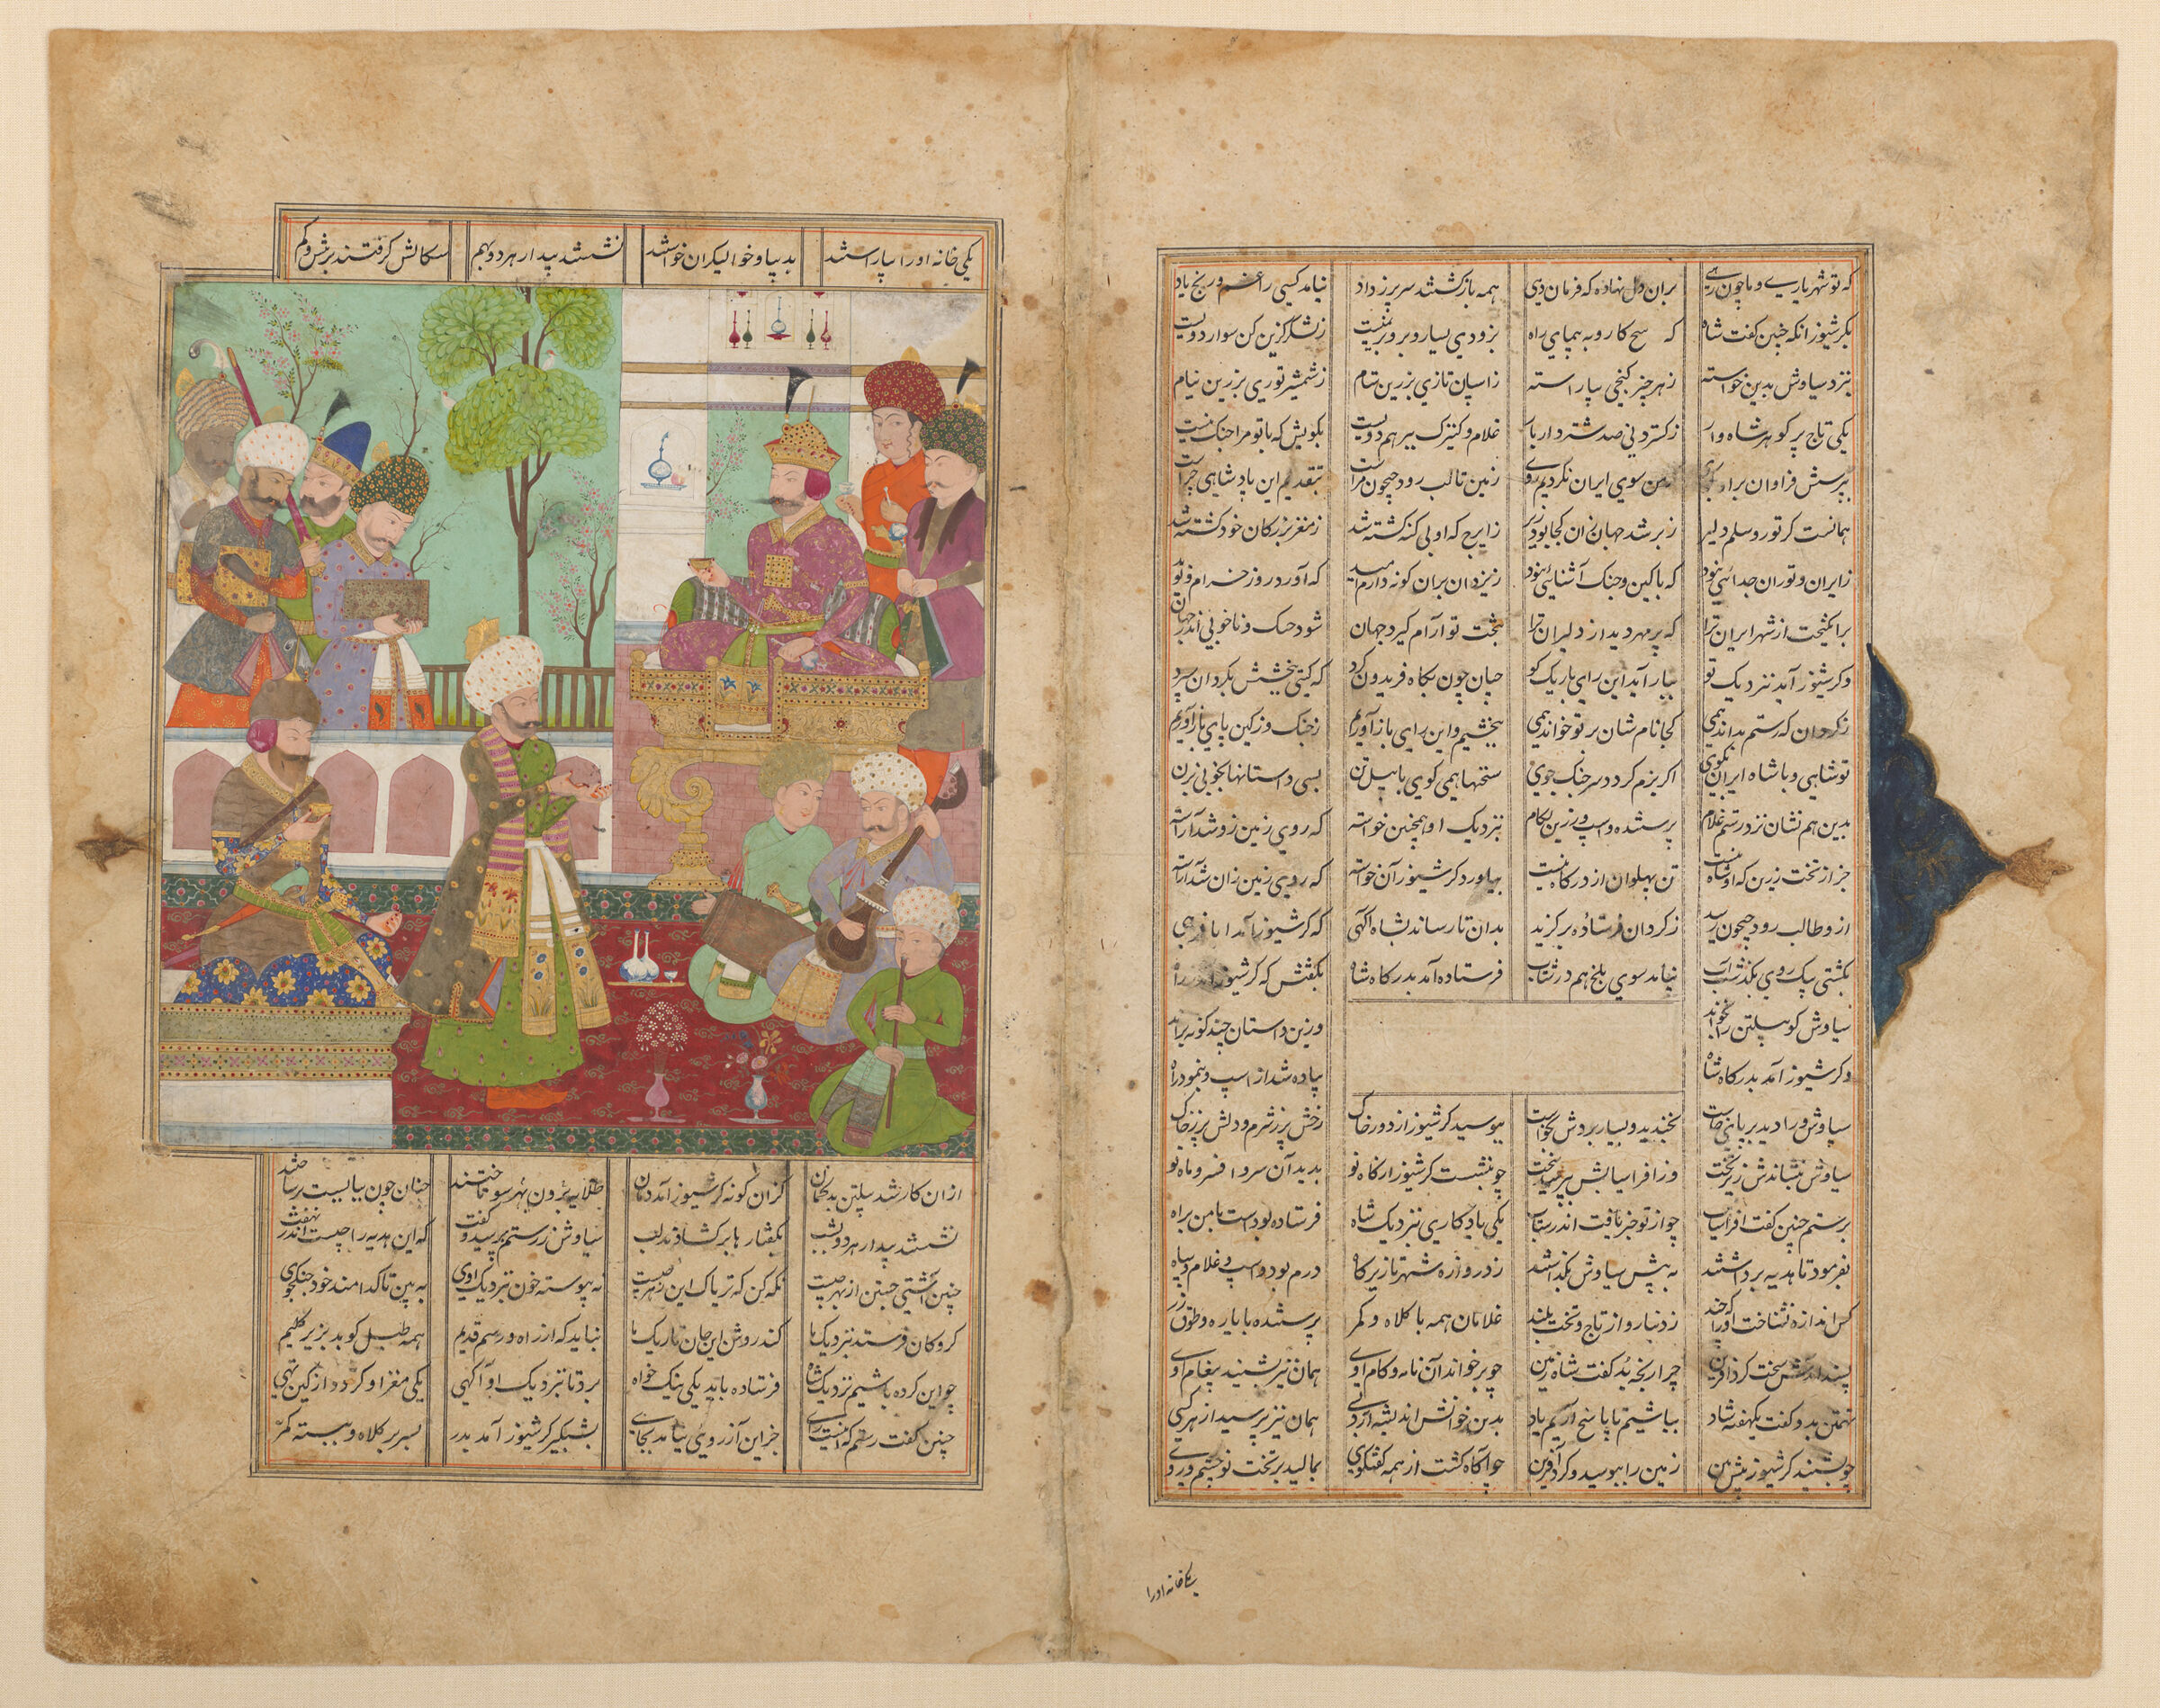 Garsivaz Presents To Siyavush A Peace Offer And Royal Gifts From Afrasiyab (Painting Recto; Text Verso Of Folio 120), Illustrated Folio From A Manuscript Of The Shahnama By Firdawsi